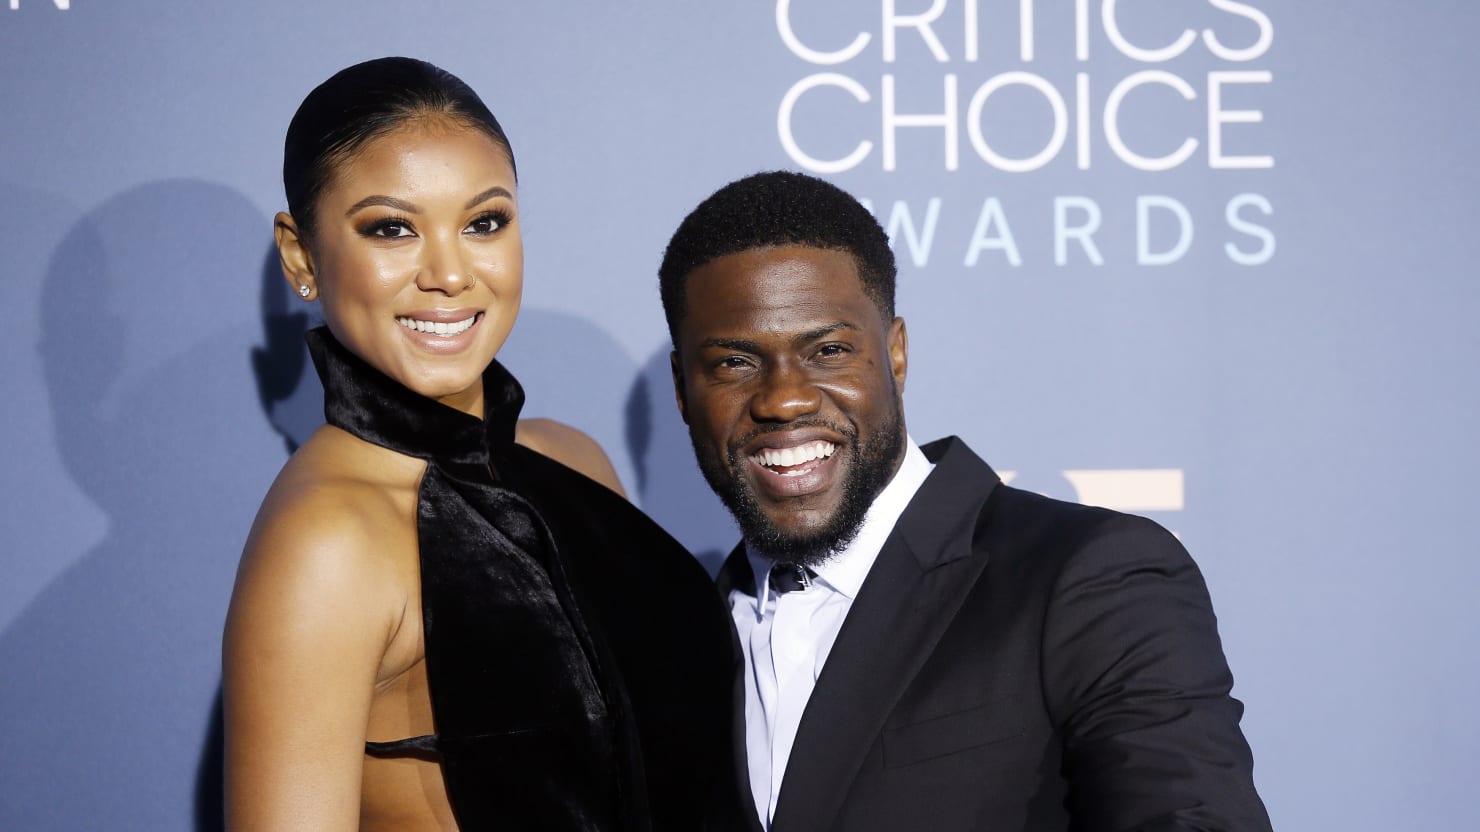 Kevin Harts Ex-Wife Slams His Lies and Infidelity